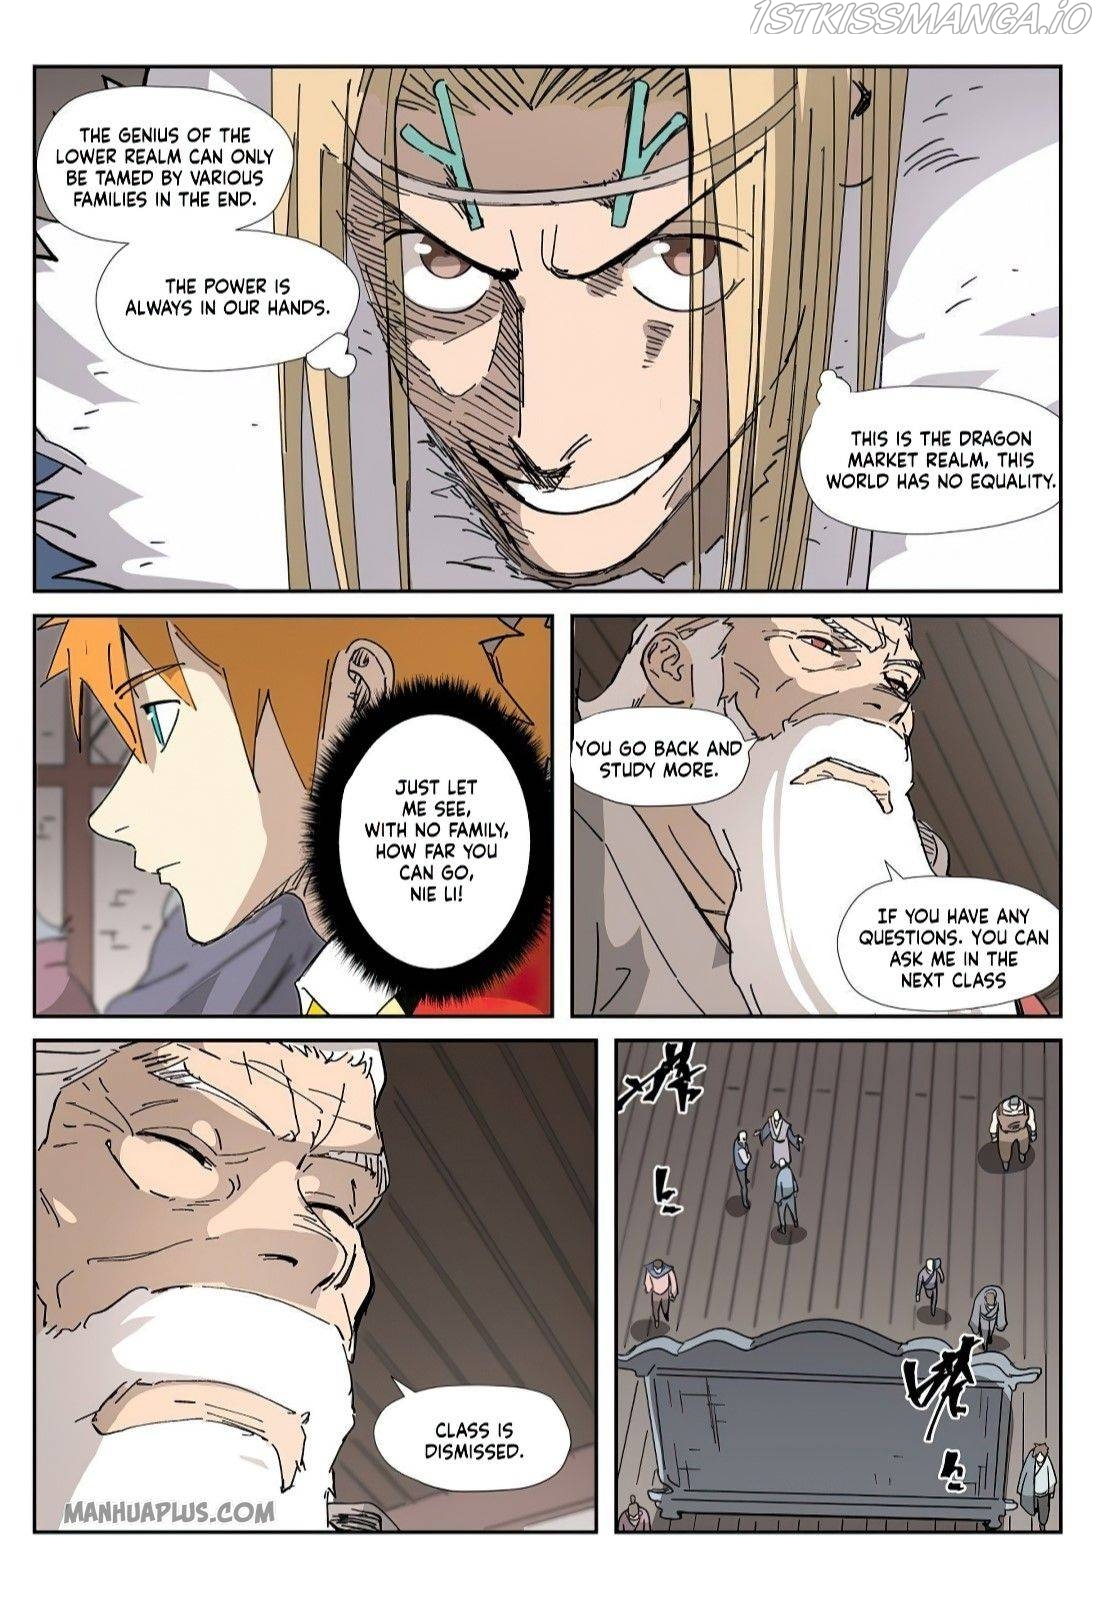 Tales of Demons and Gods Manhua Chapter 328.5 - Page 7